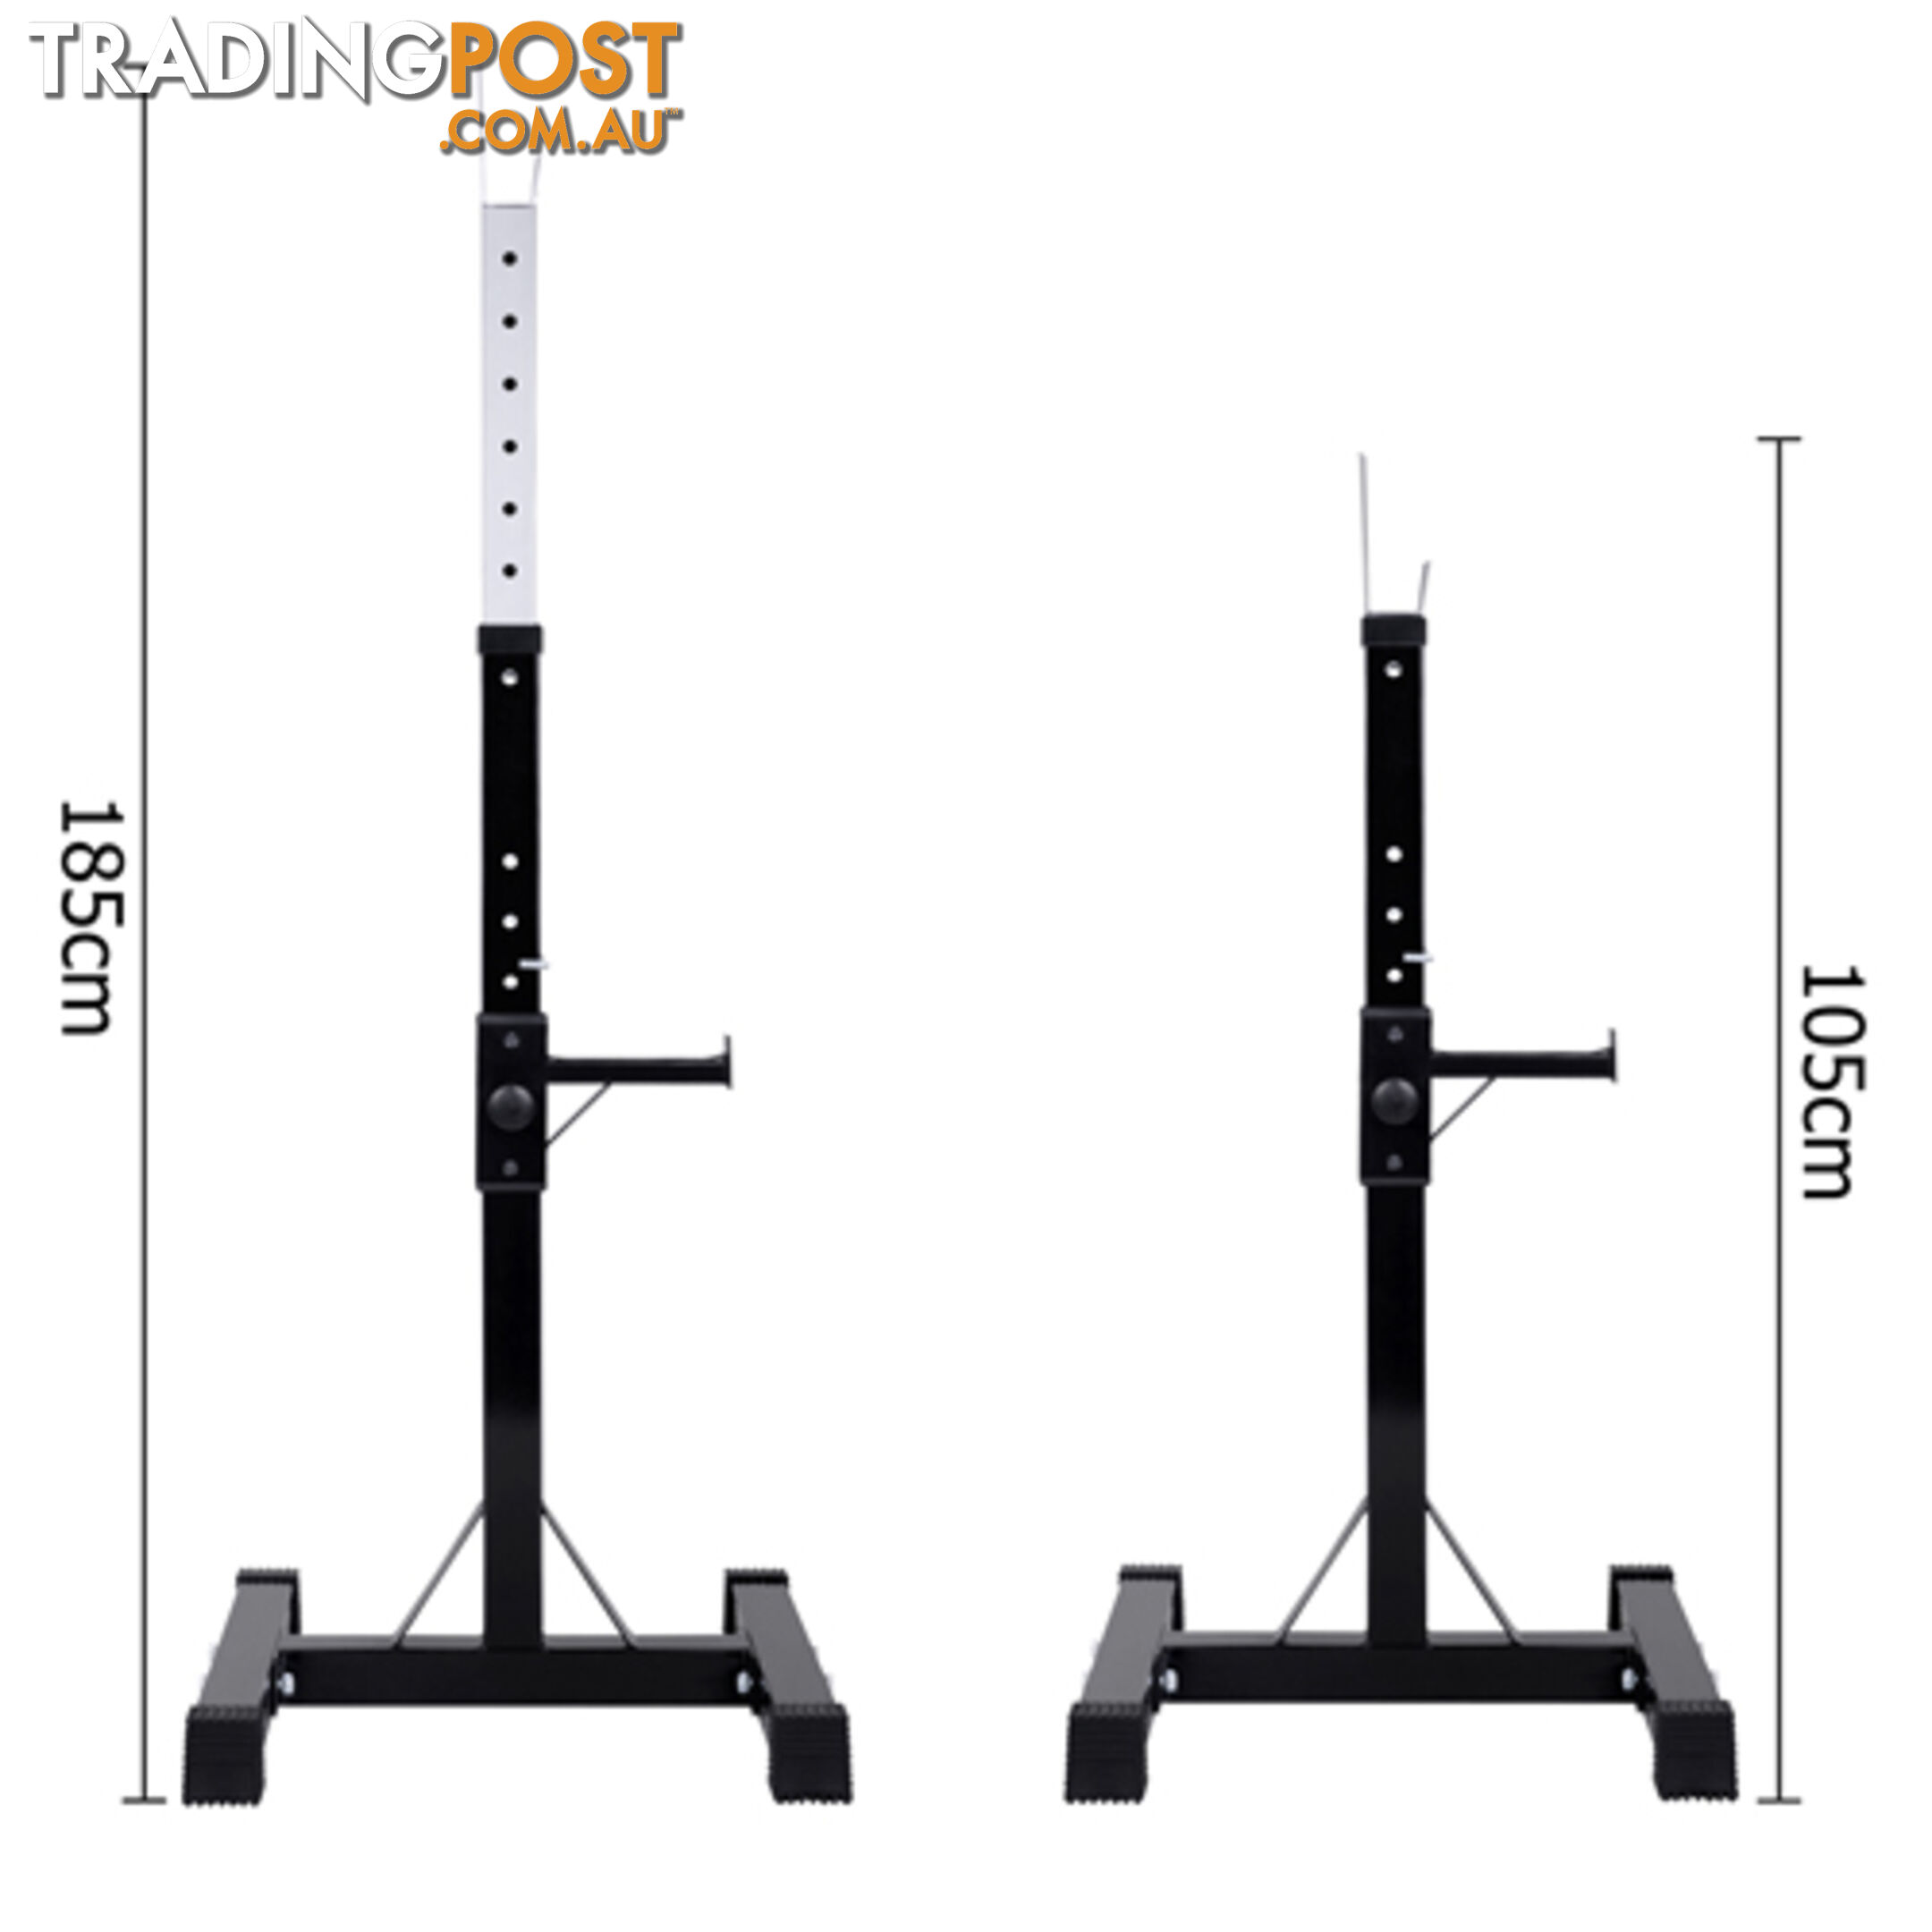 Squat Rack Bench Press Weight Lifting Stand Fitness